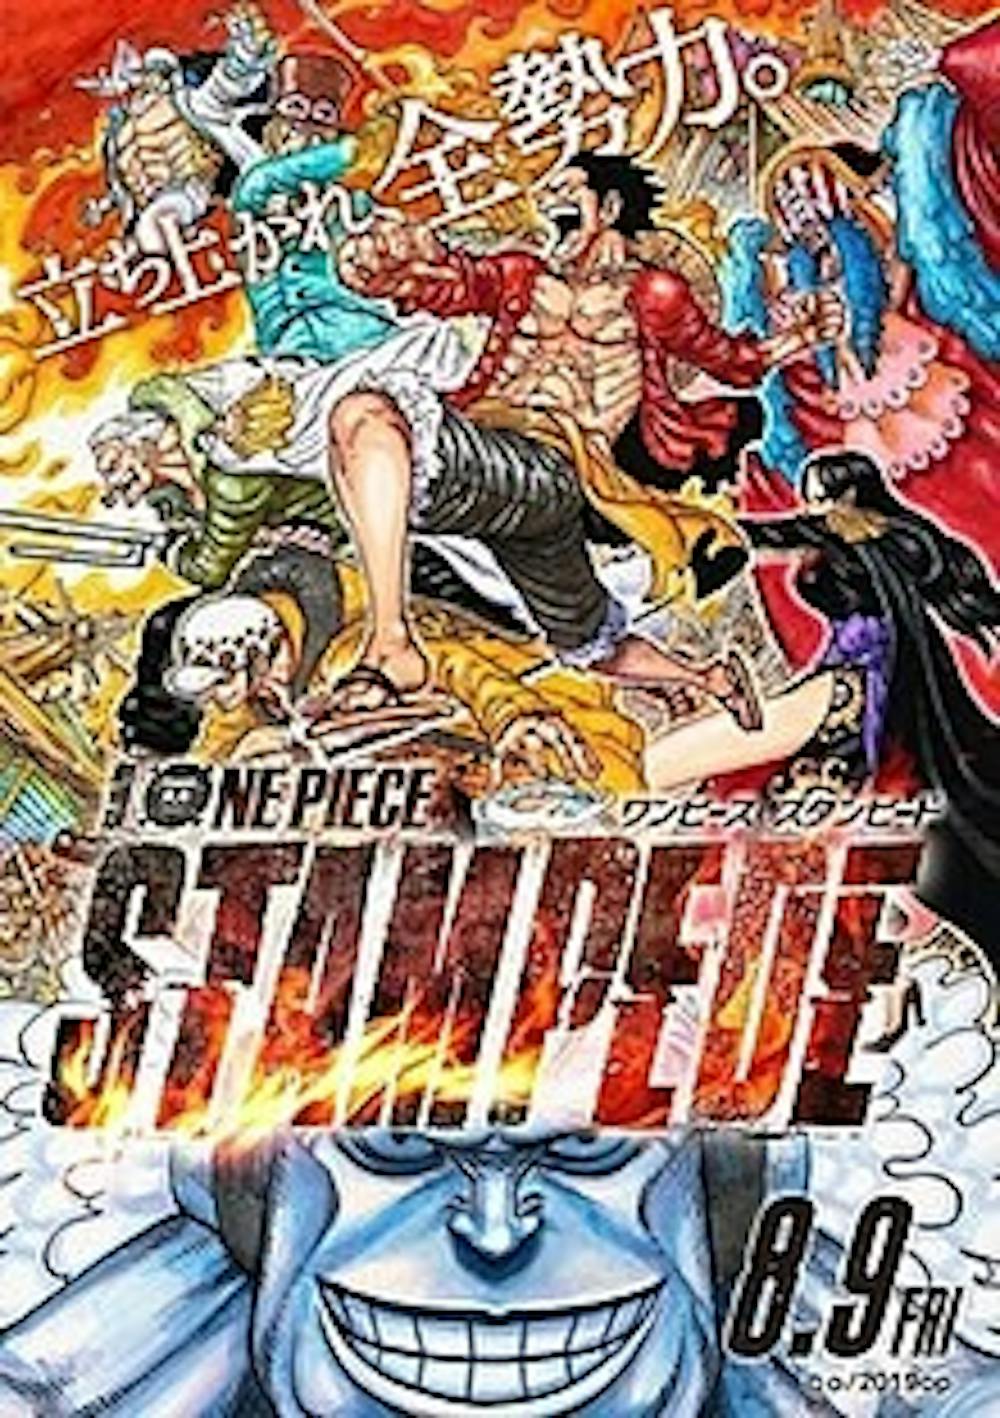 "One Piece" series releases feature film "Stampede" to celebrate 20th anniversary.